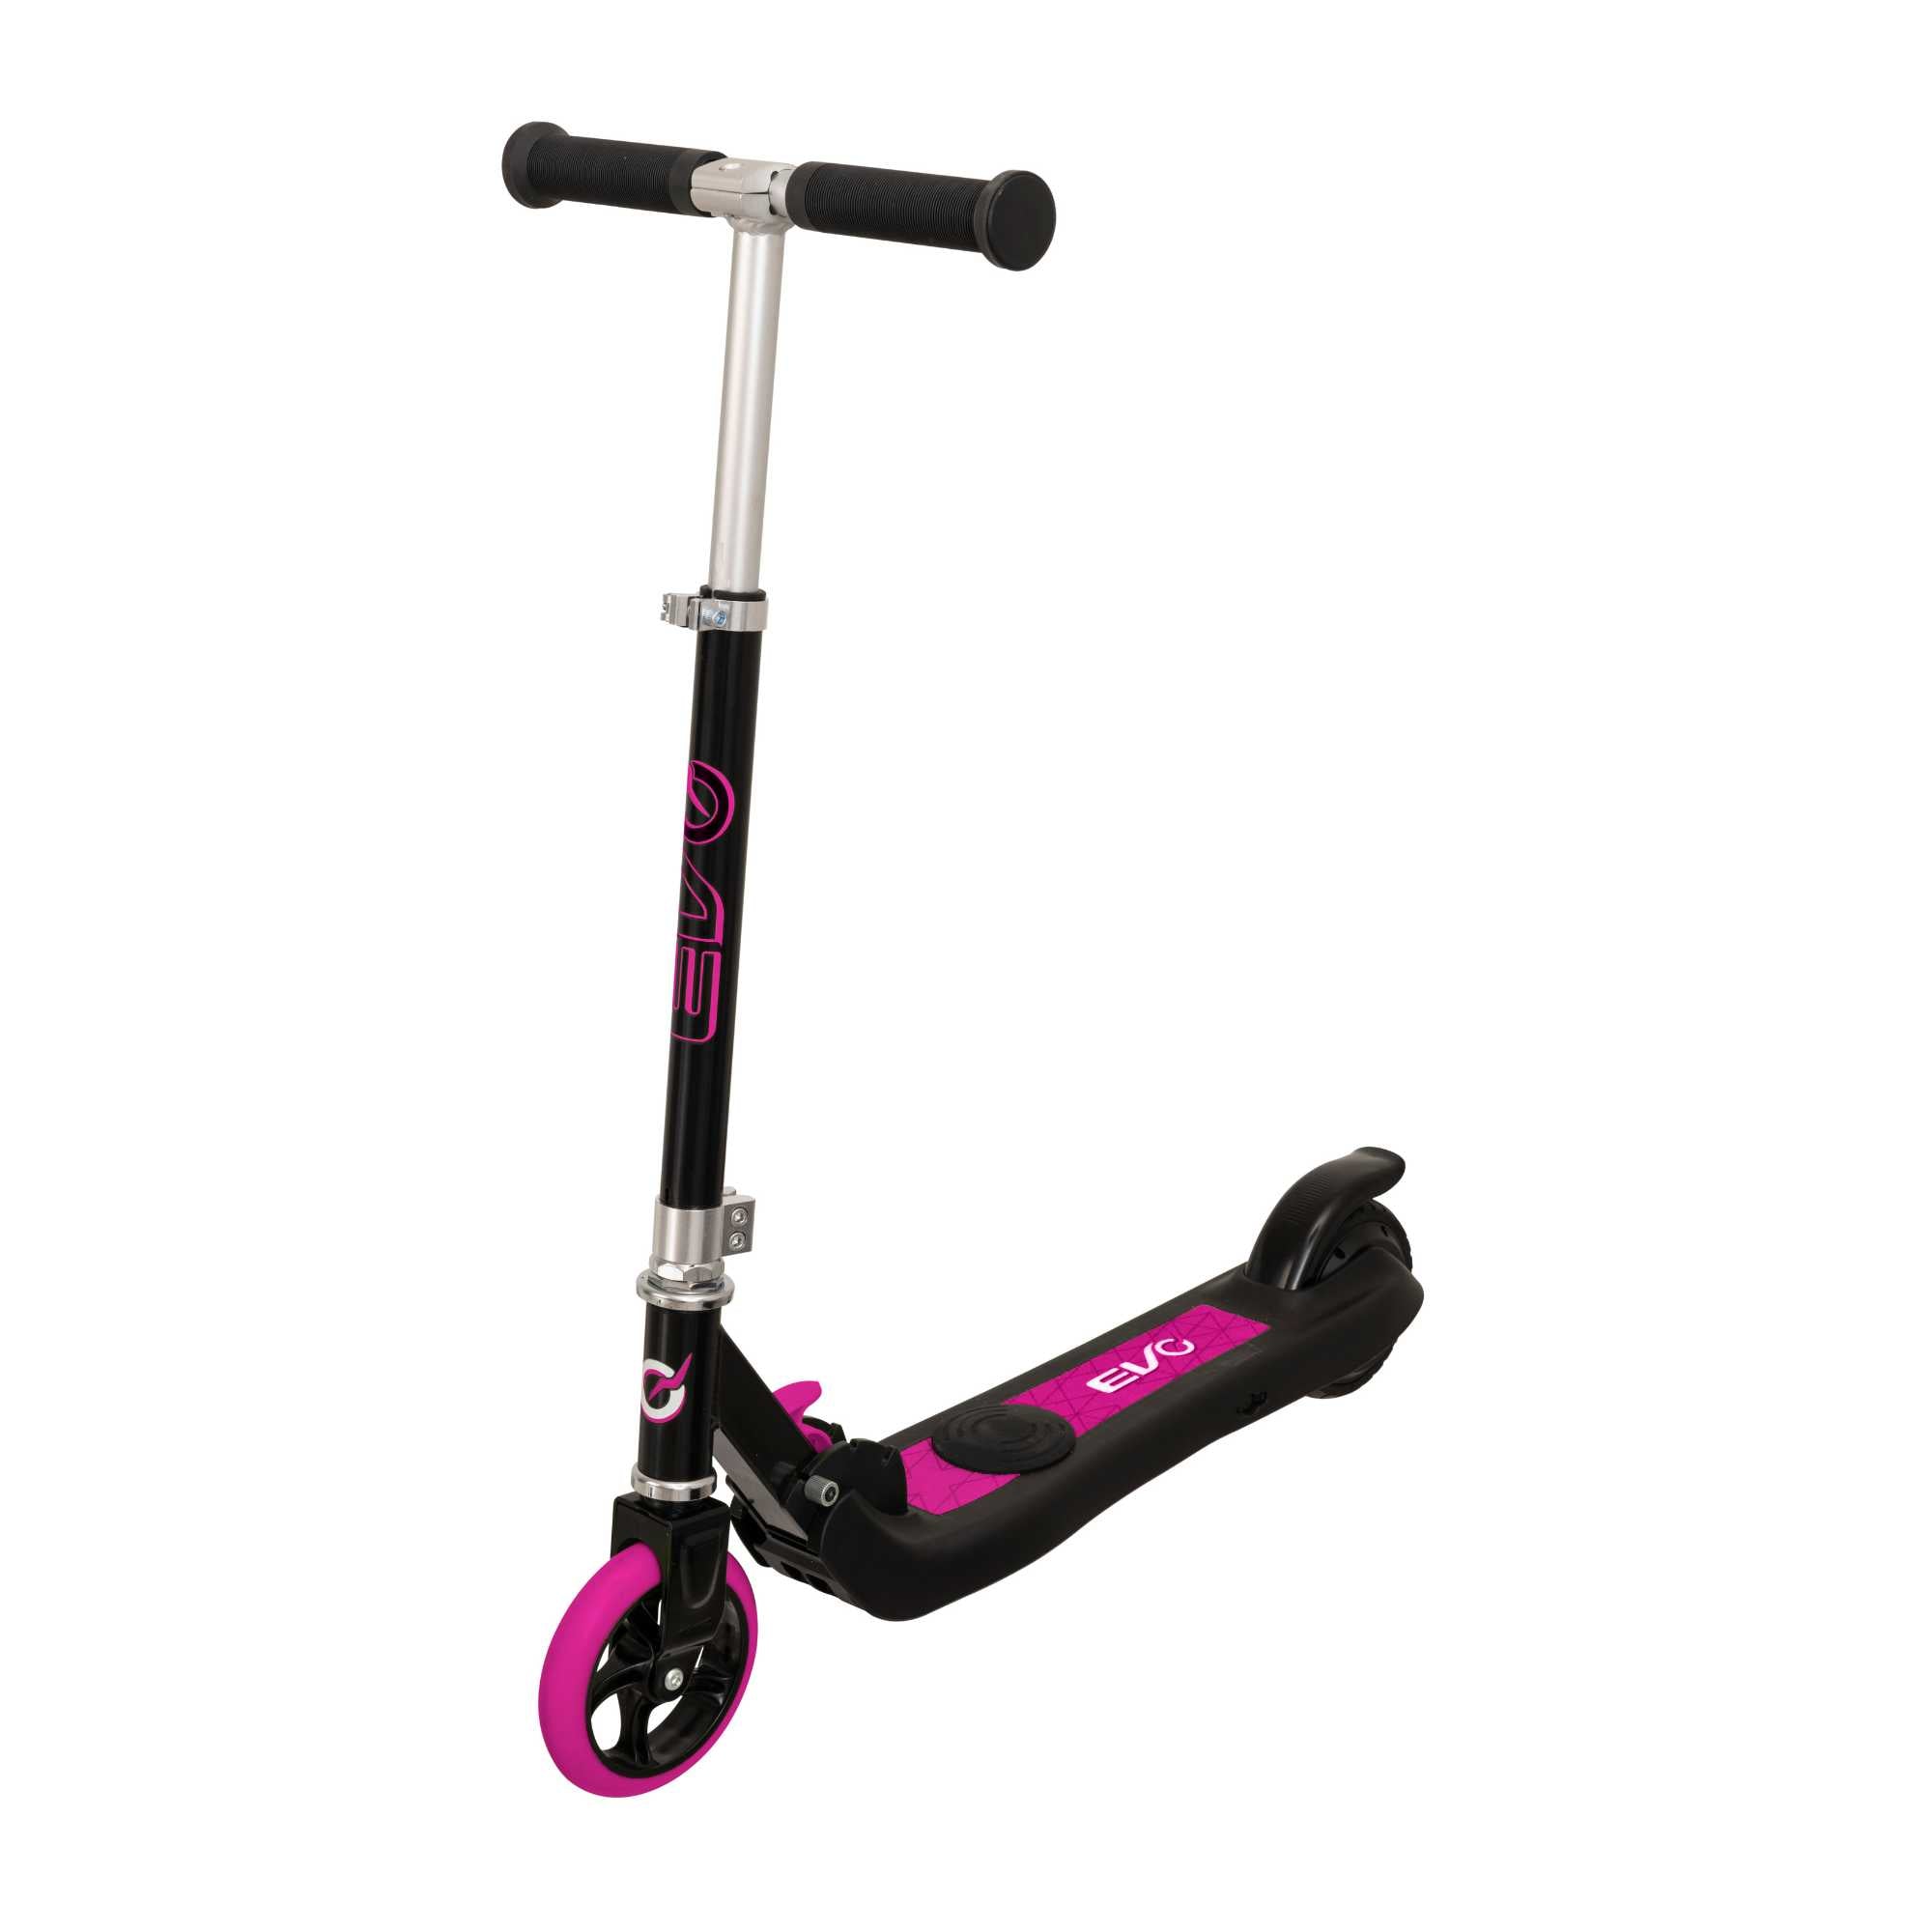 Image of Evo Vt1 Lithium Scooter Pink